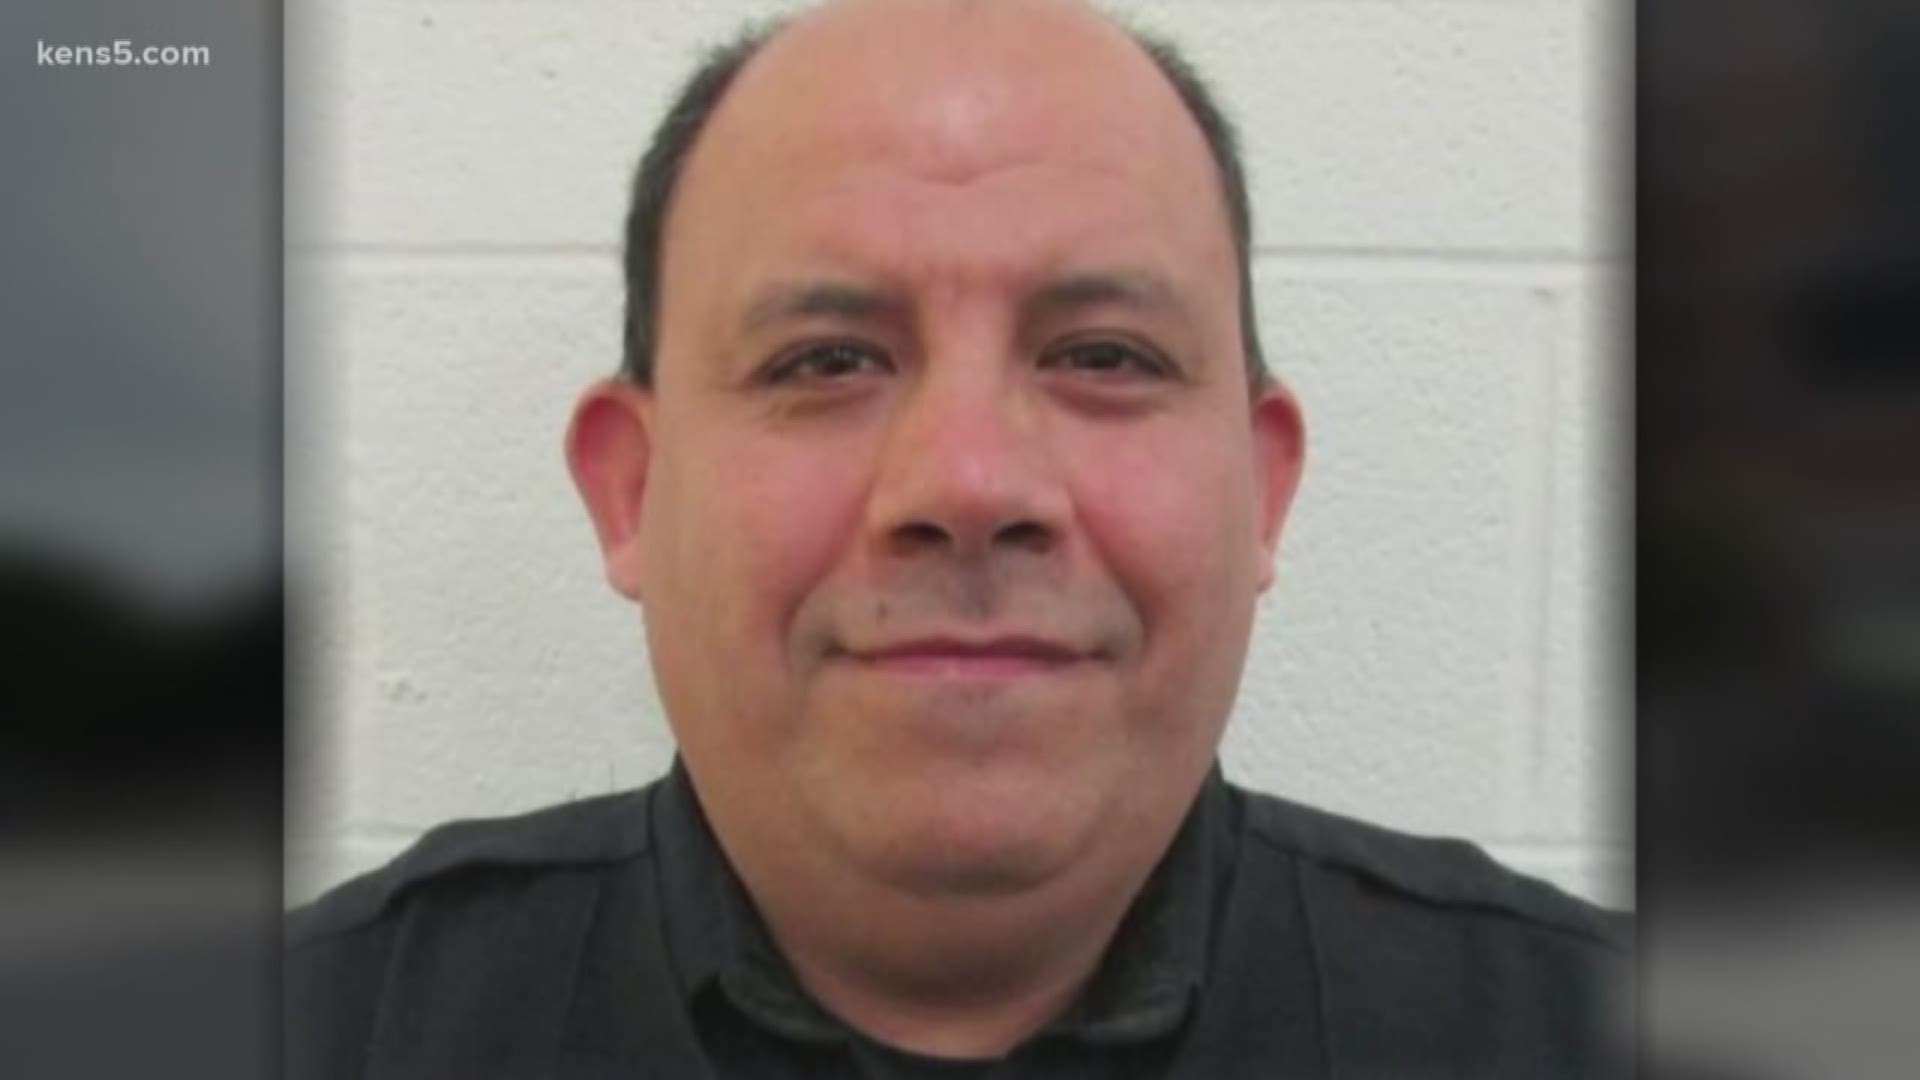 A Bexar County deputy is arrested, accused of sexually assaulting a child. The sheriff says the victim's mother is an undocumented immigrant. Eyewitness News reporter Sharon Ko has more.